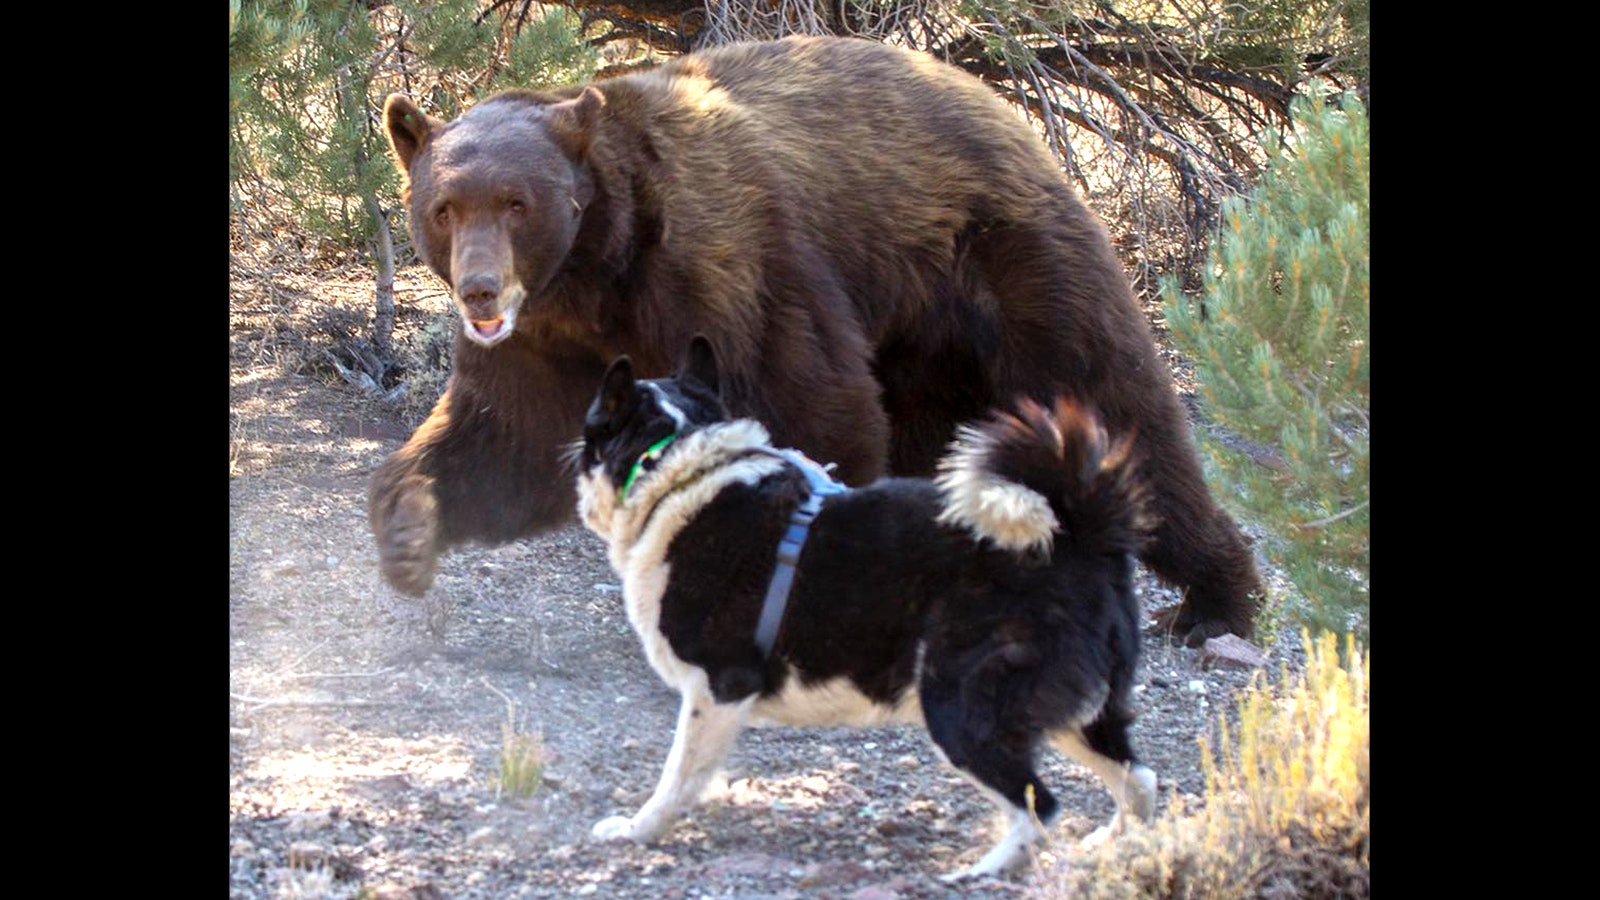 A Karelian bear dog catches the attention of a large bear. The dogs are trained to ward off bears while staying out of their deadly reach.